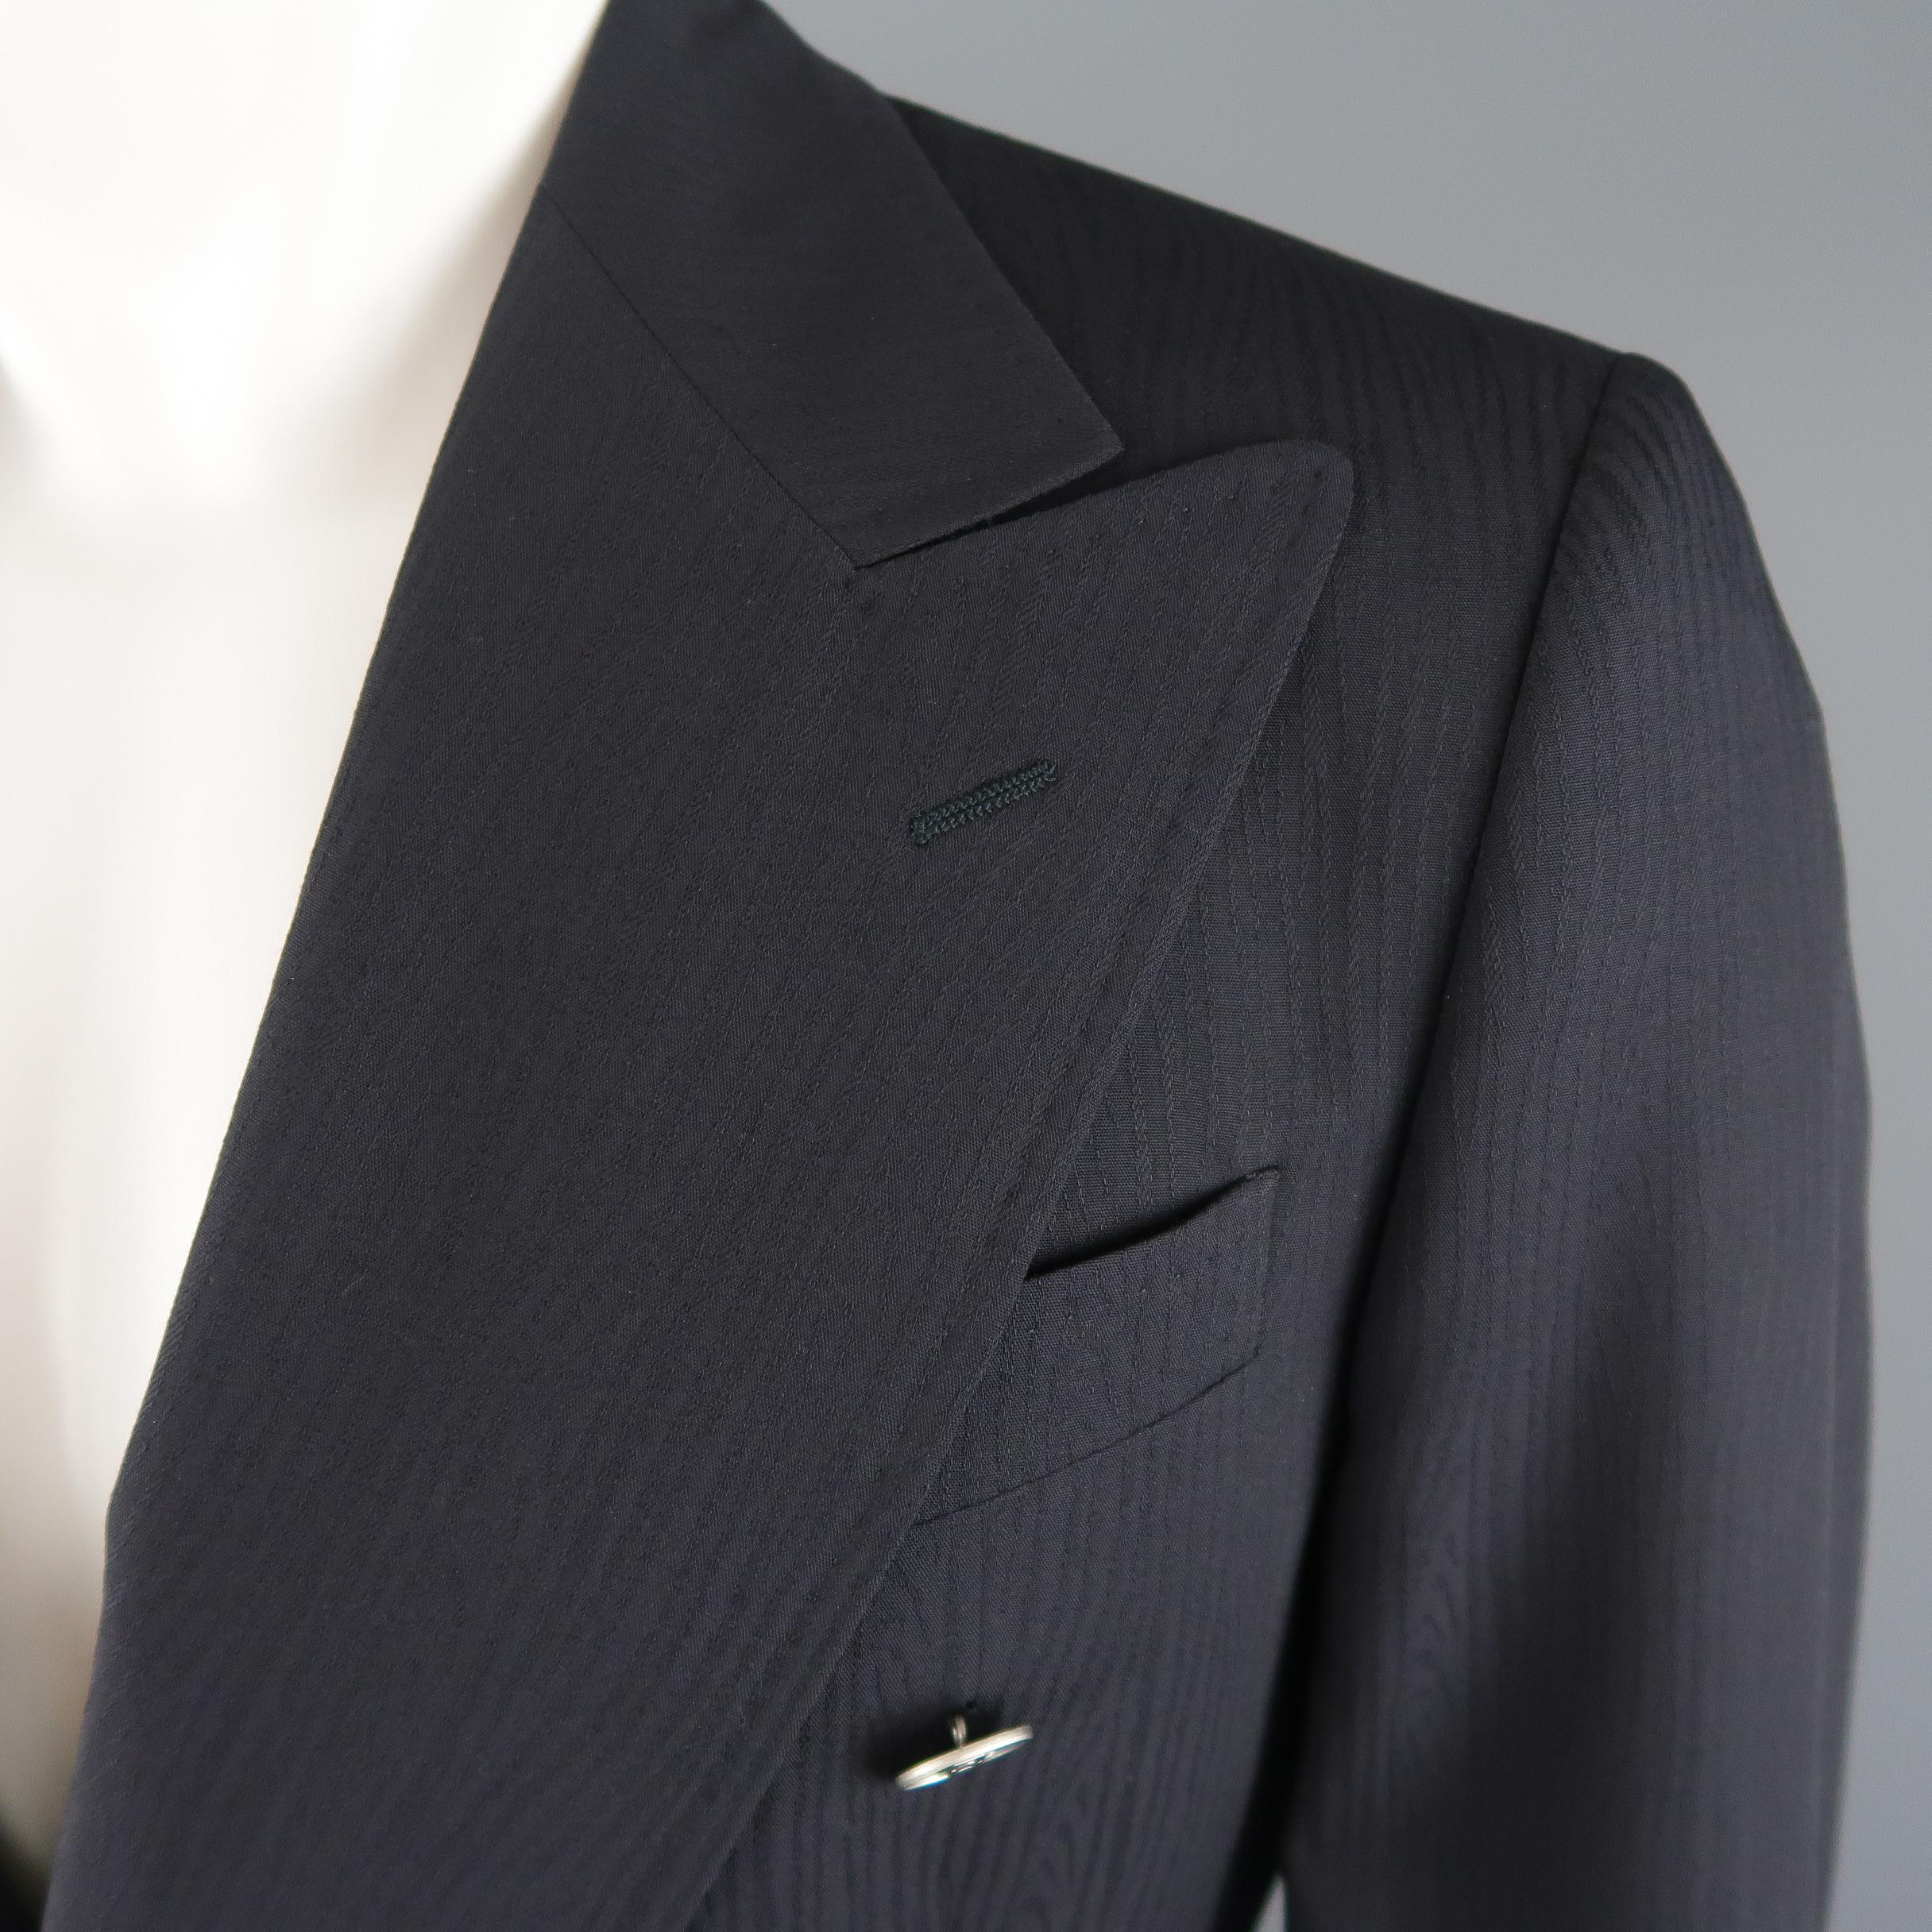 DOLCE & GABBANA sport coat comes in moire wool with a peak lapel, double breasted closure, matte silver tone metal buttons with gold tone DG logos, and double vented back. Made in Italy.
 
Excellent Pre-Owned Condition.
Marked: IT 38
